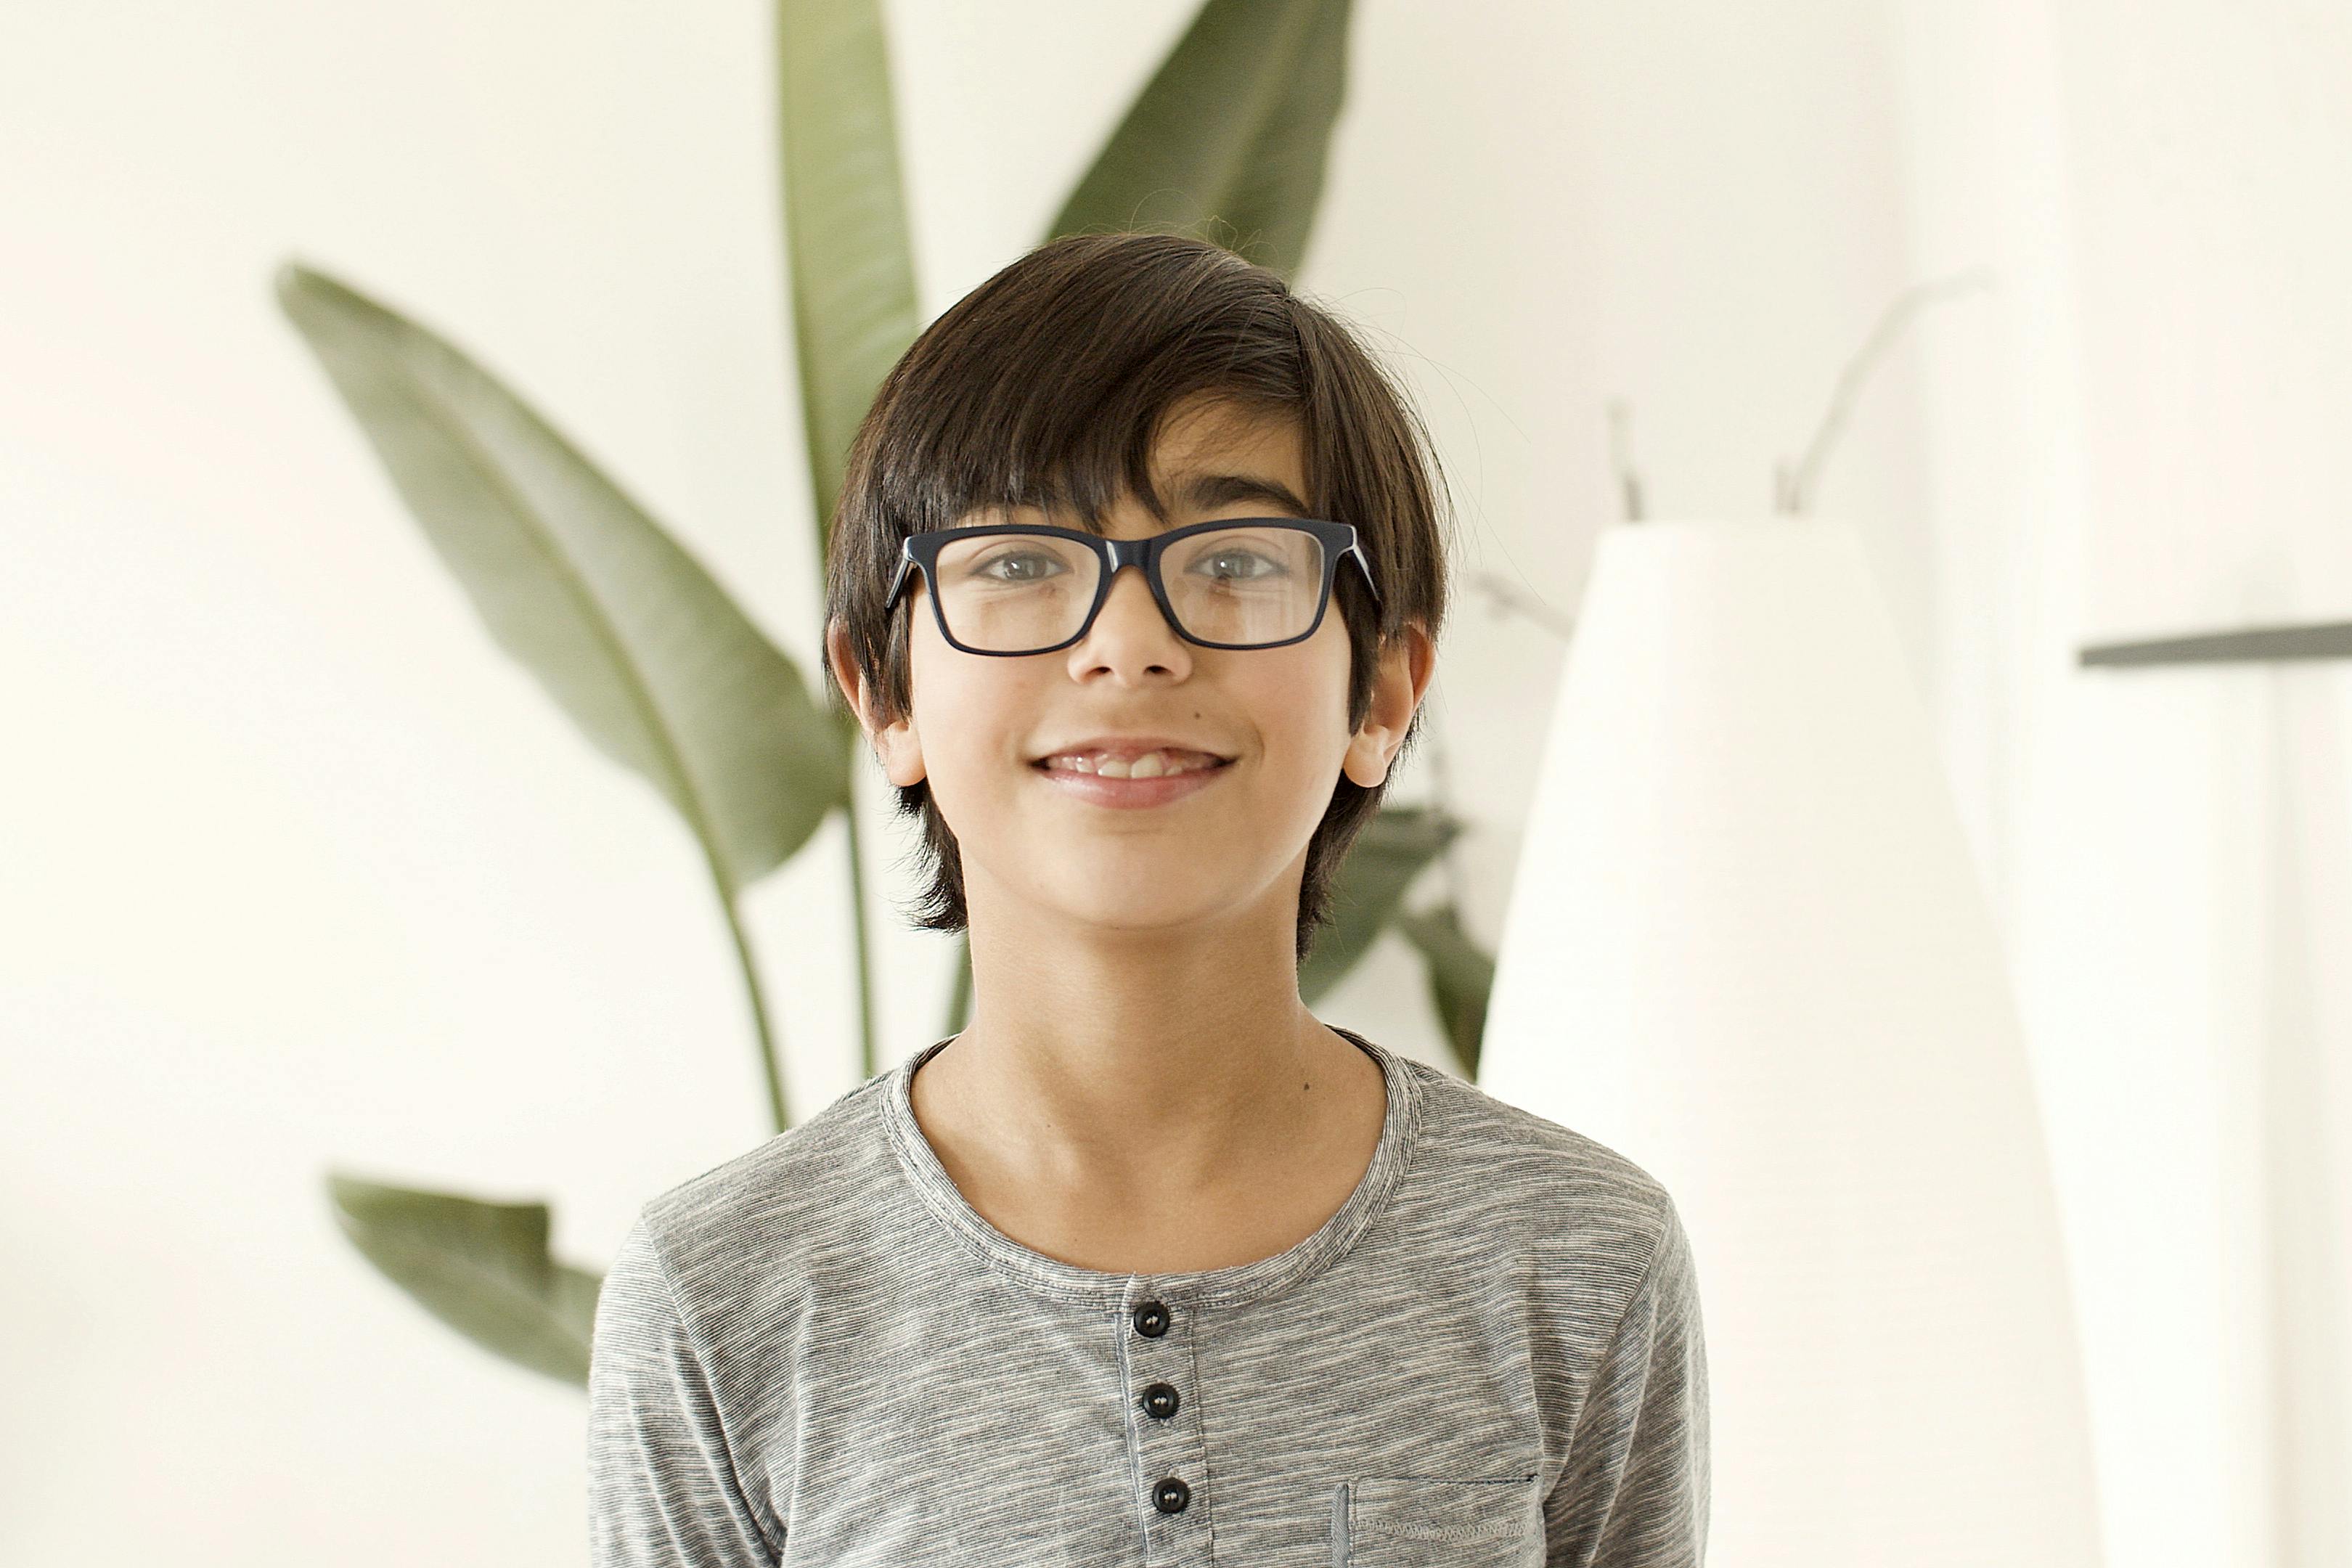 A young boy wearing glasses | Source: Pexels